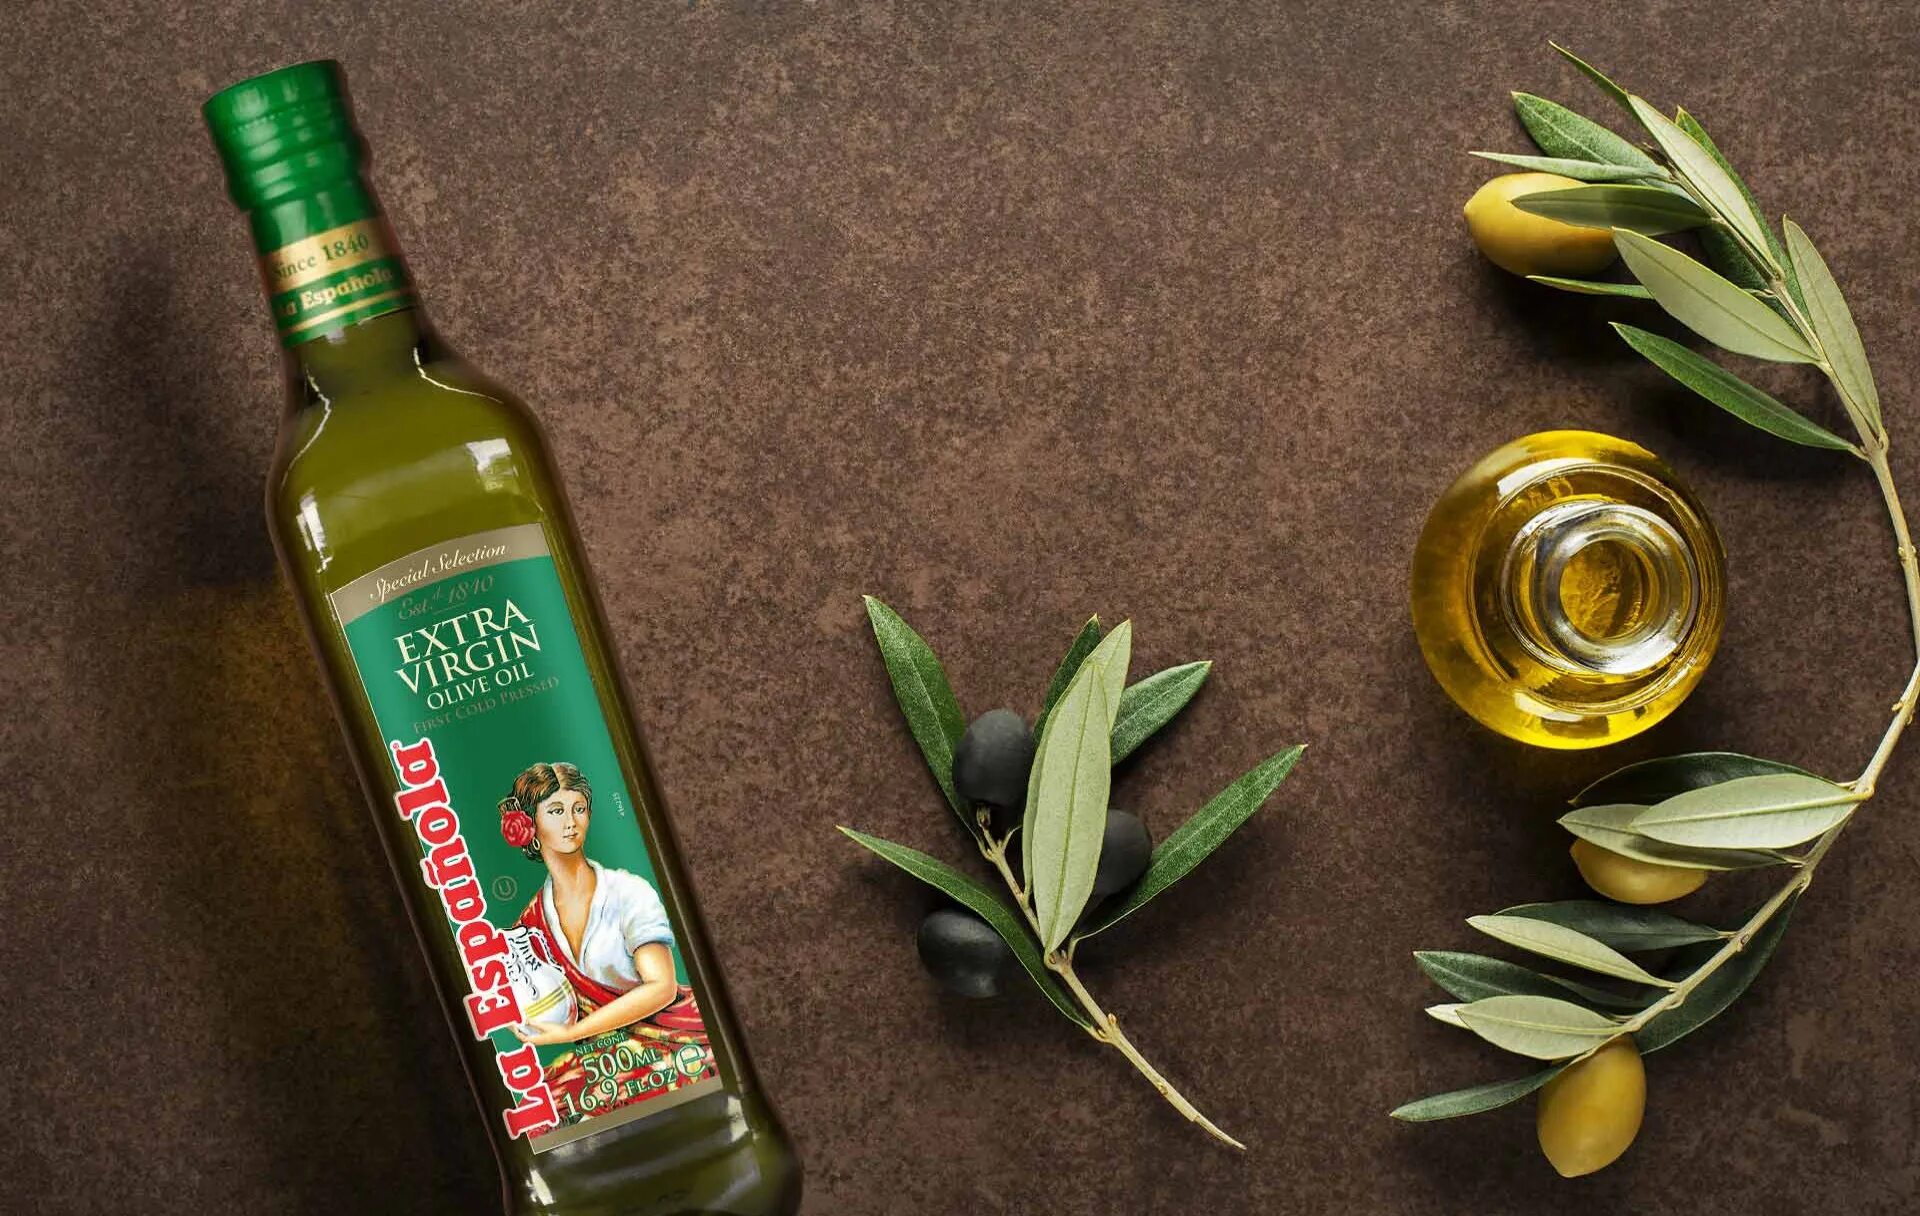 Olive Oil масло оливковое. San Michele Olive Oil. Олив Ойл масло оливковое. Оливки и оливковое масло. Сорта оливкового масла